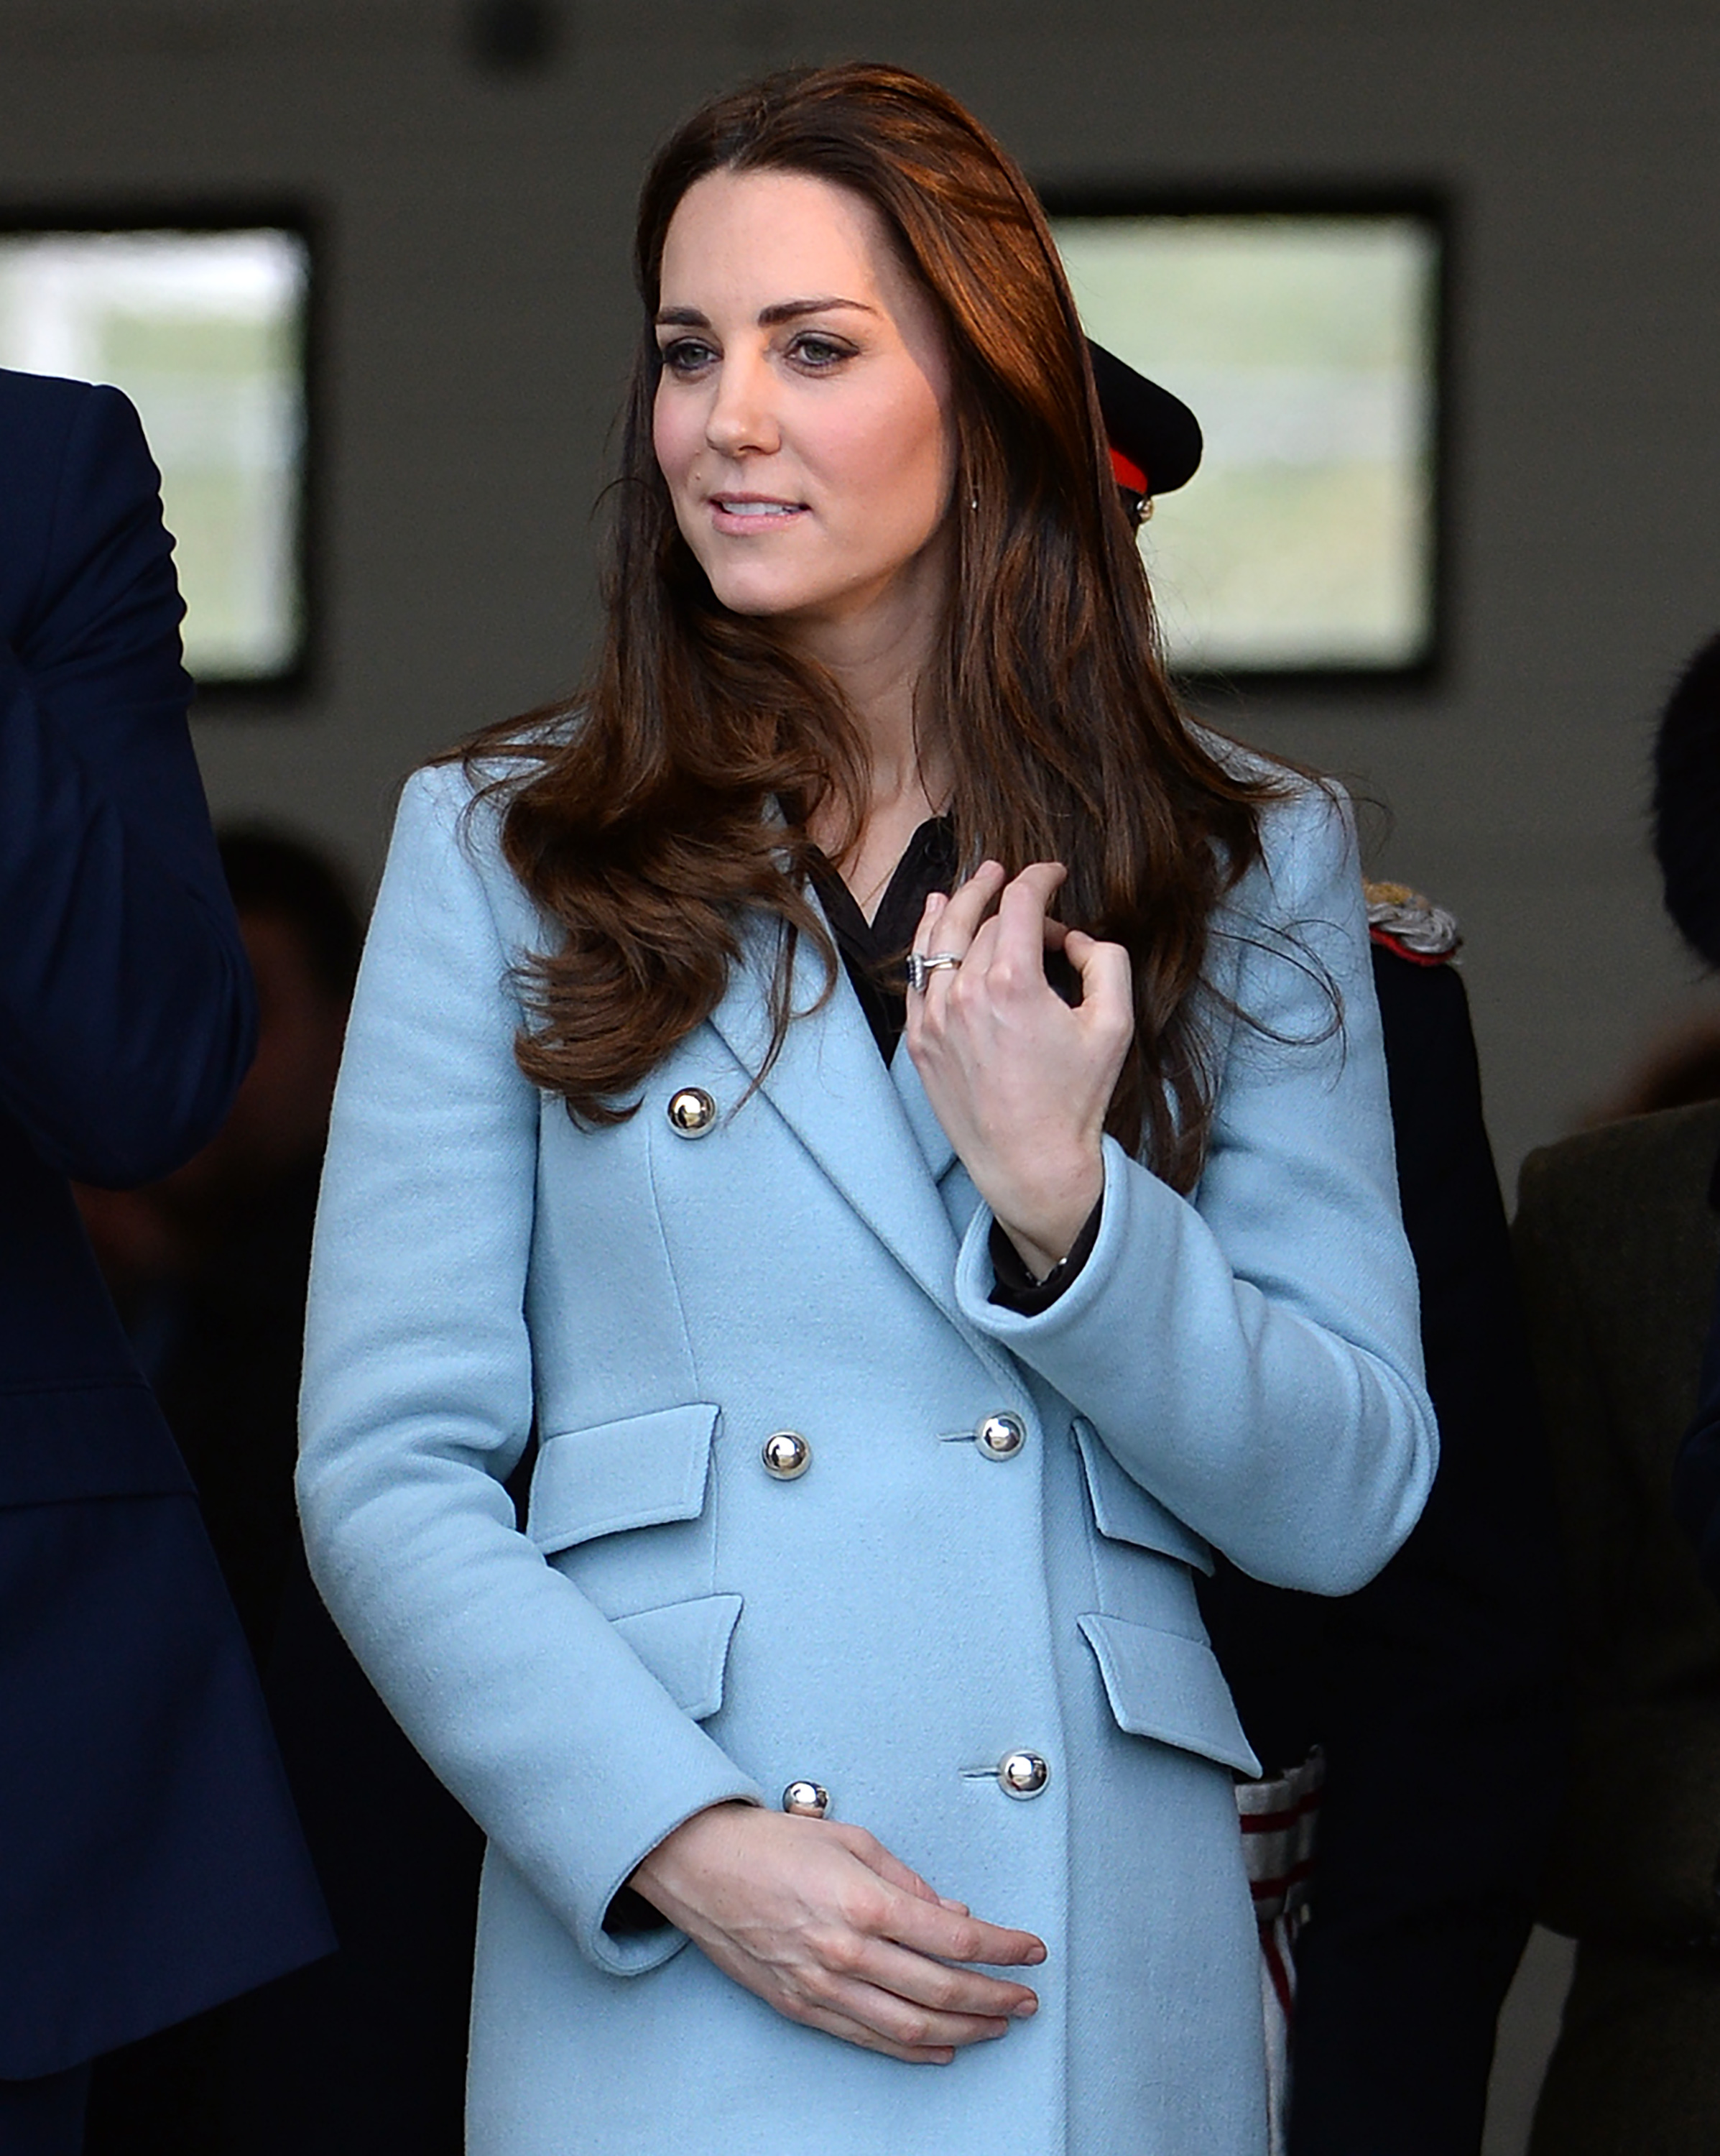 Catherine, Duchess of Cambridge visit the Valero Pembroke Refinery in Dyfed, Wales, on Nov. 8, 2014.